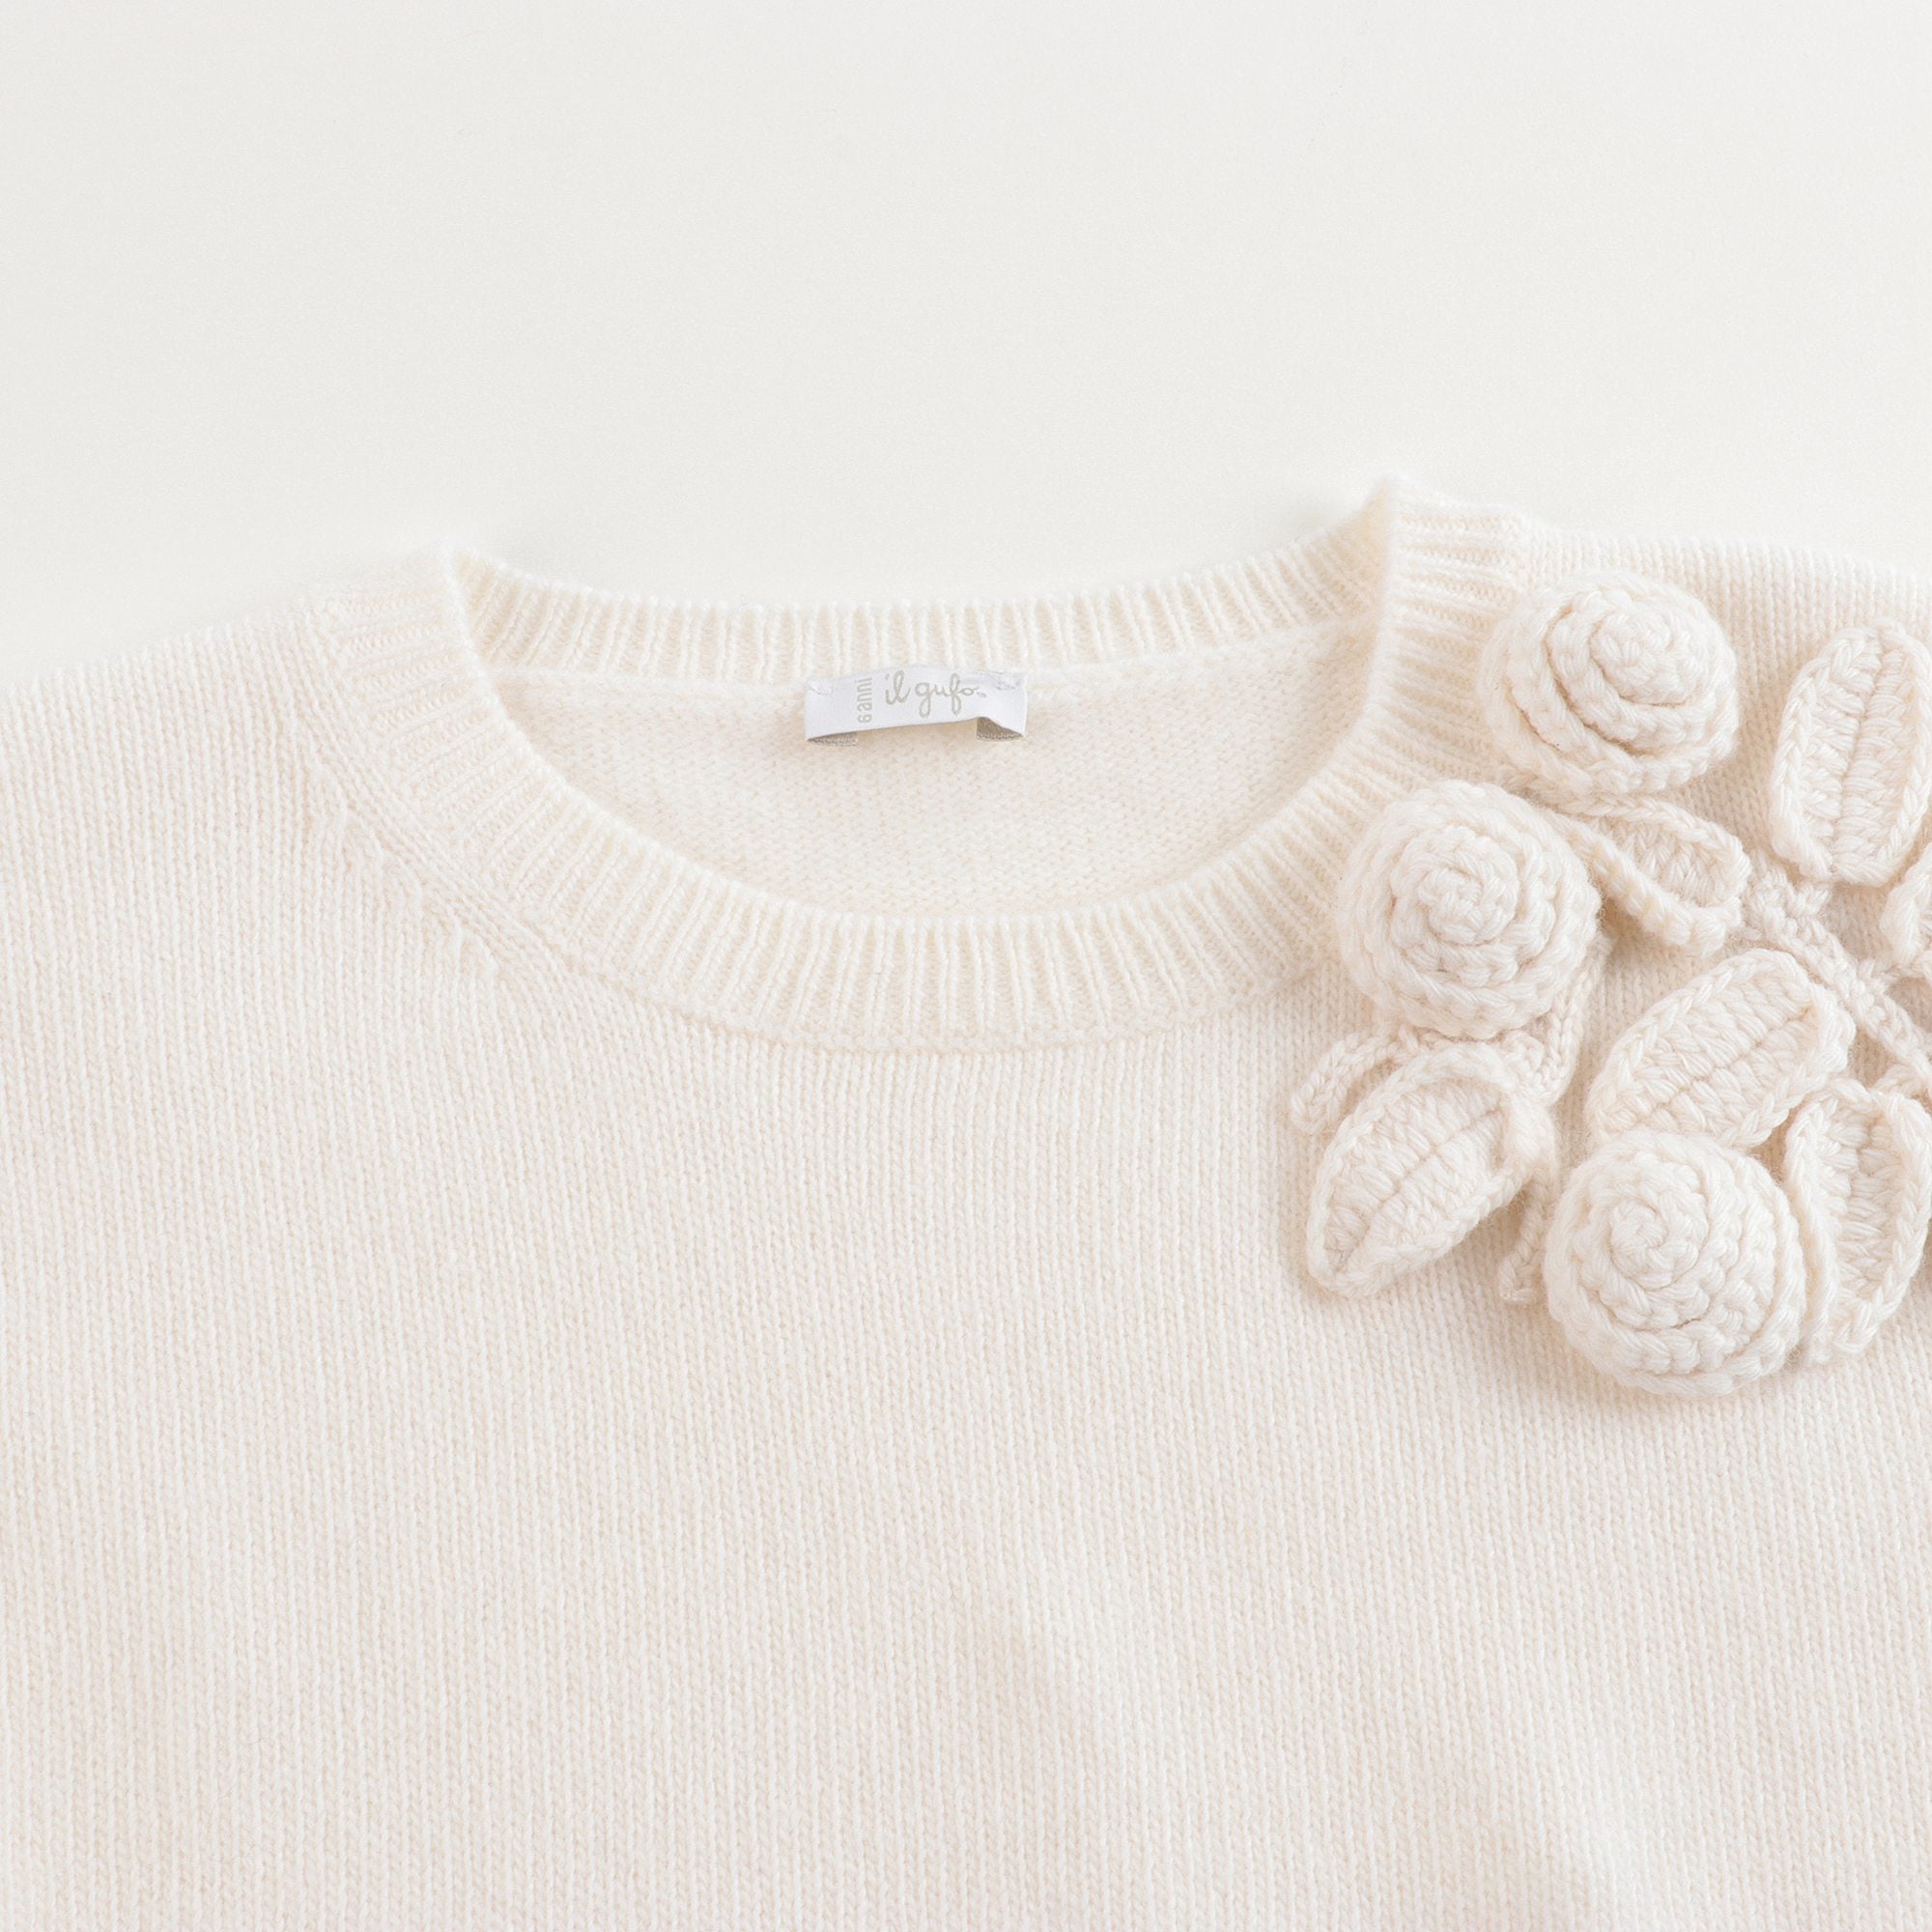 Girls White Embroidered Wool Sweater